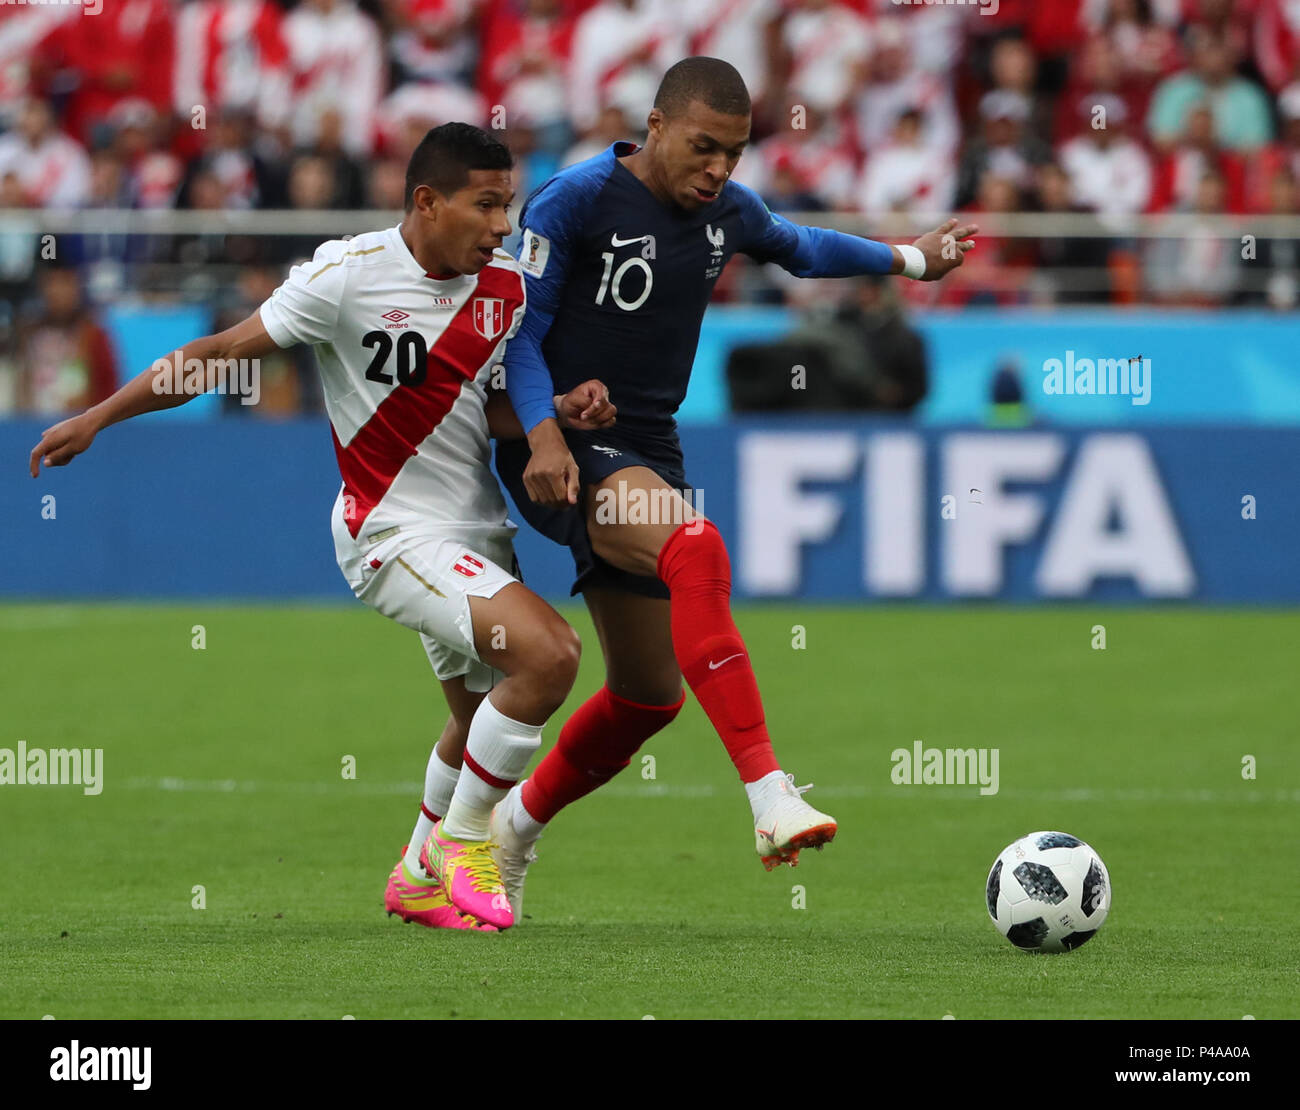 Yekaterinburg, Russia. 21st June, 2018. Edison Flores (L) of Peru vies with Kylian Mbappe of France during the 2018 FIFA World Cup Group C match between France and Peru in Yekaterinburg, Russia, June 21, 2018. Credit: Bai Xueqi/Xinhua/Alamy Live News Stock Photo